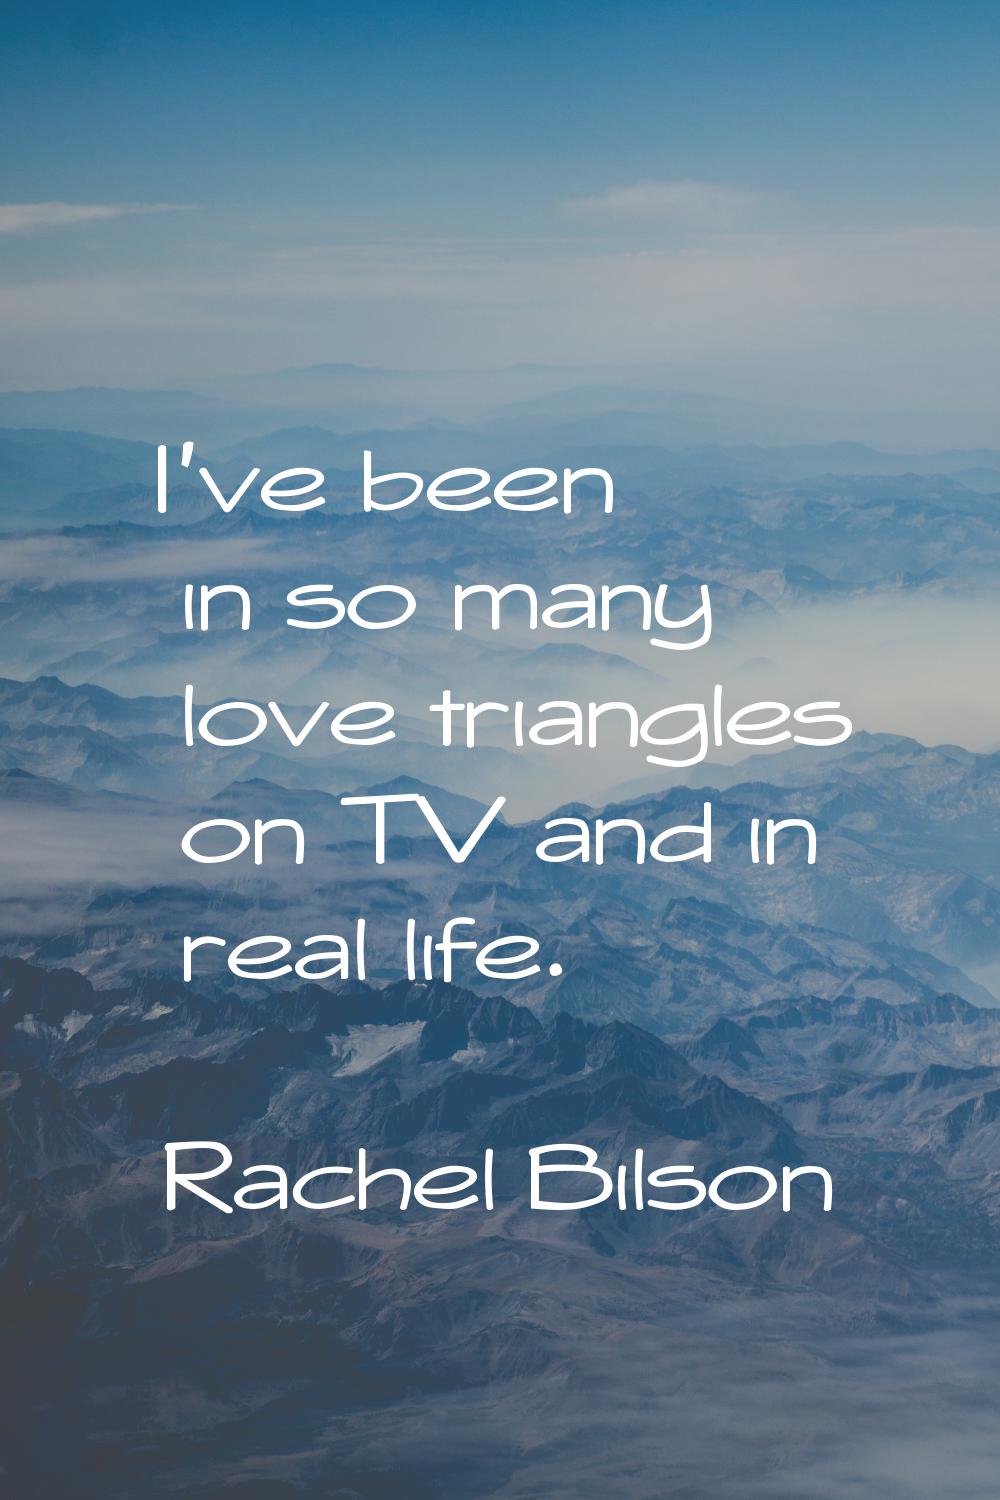 I've been in so many love triangles on TV and in real life.